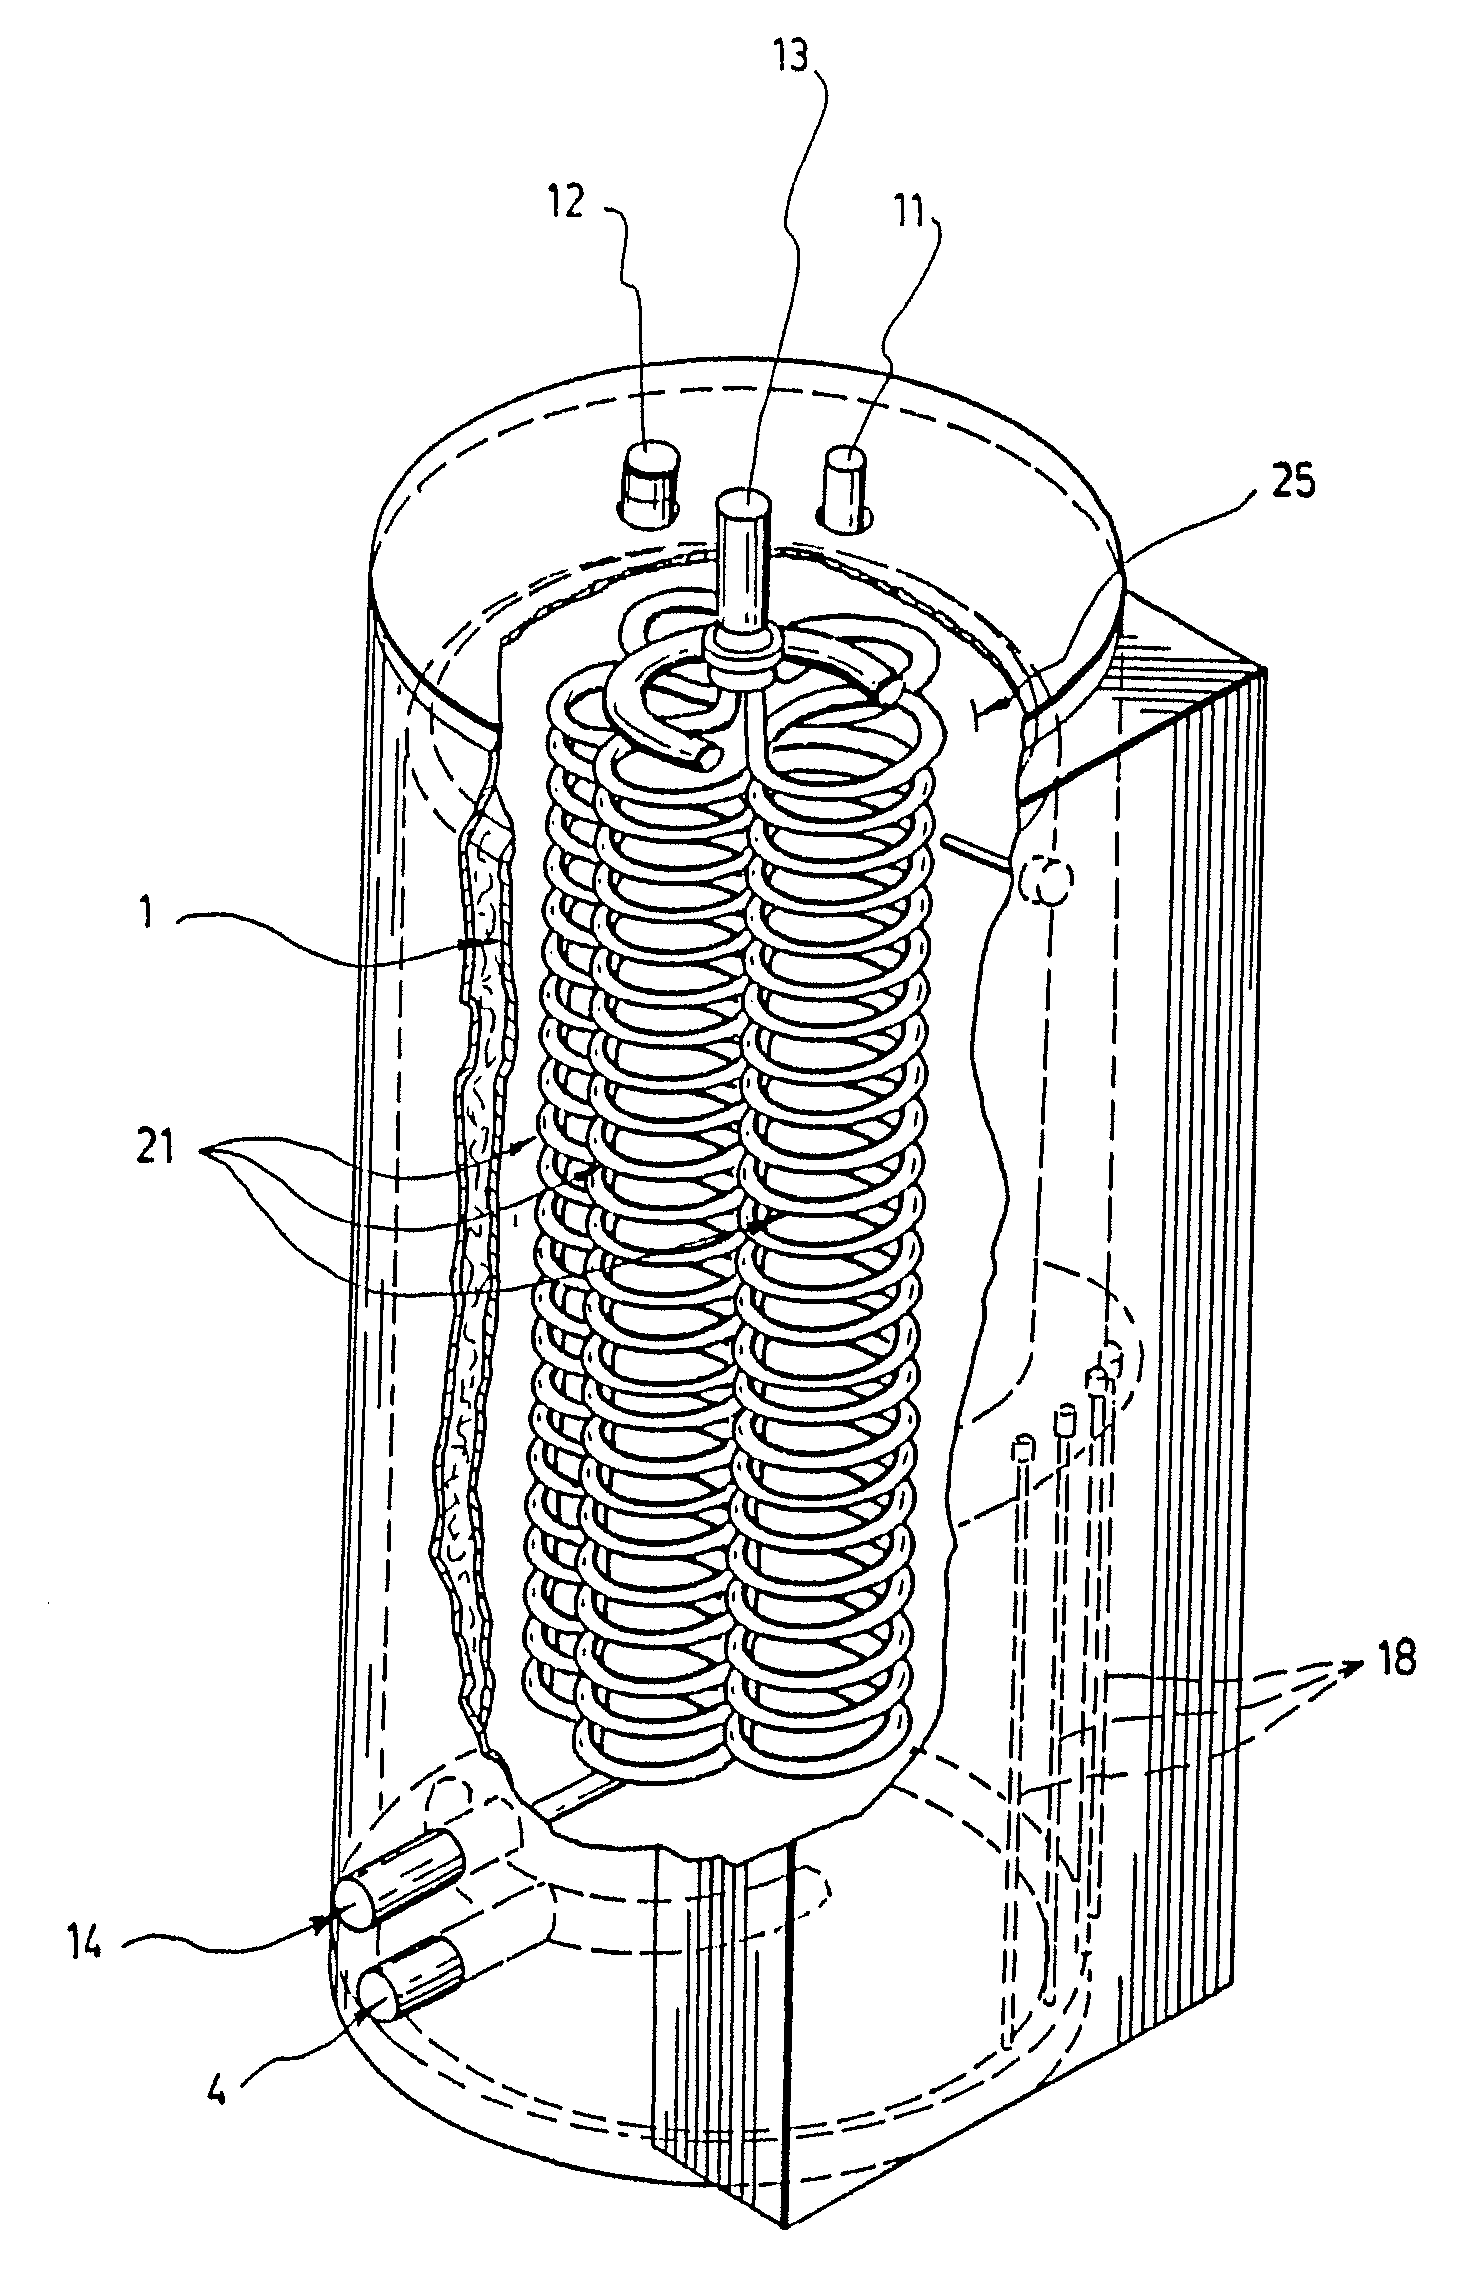 Boiler with an Adjacent Chamber and an Heliciodal Heat Exchanger